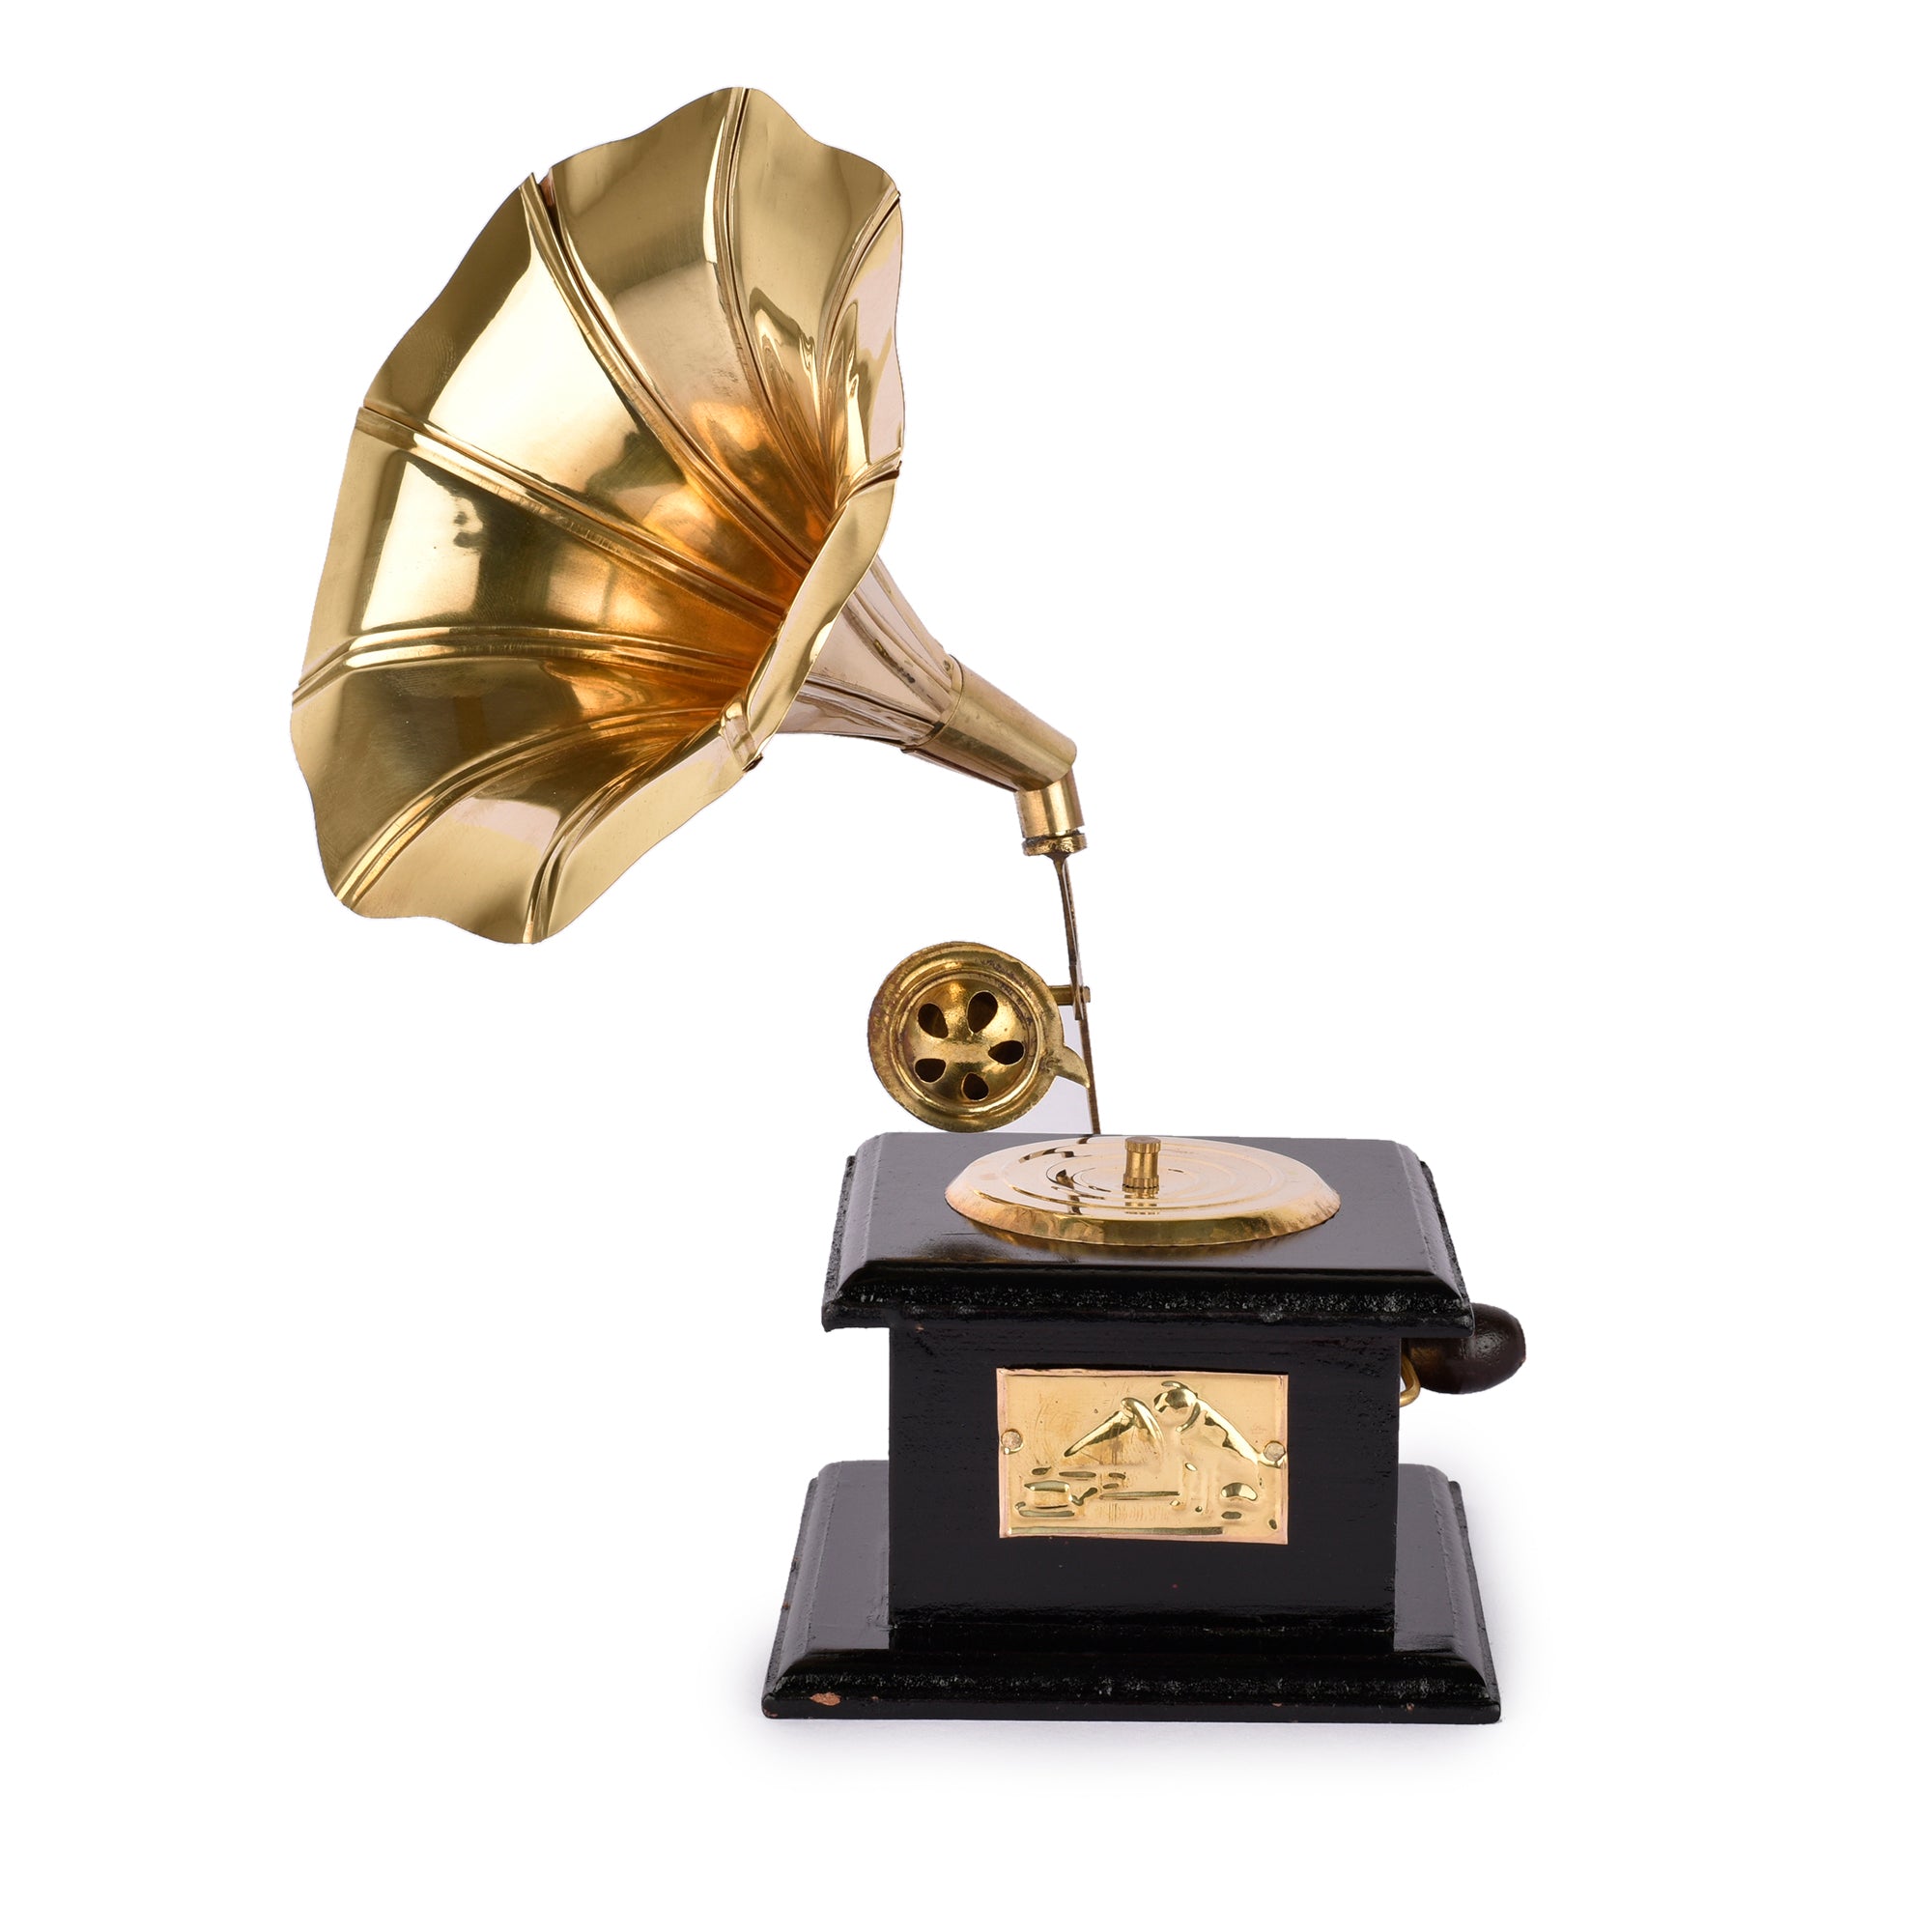 Gold-Toned Handcrafted Antique Music Decorative Gramophone Showpiece - 6 inches